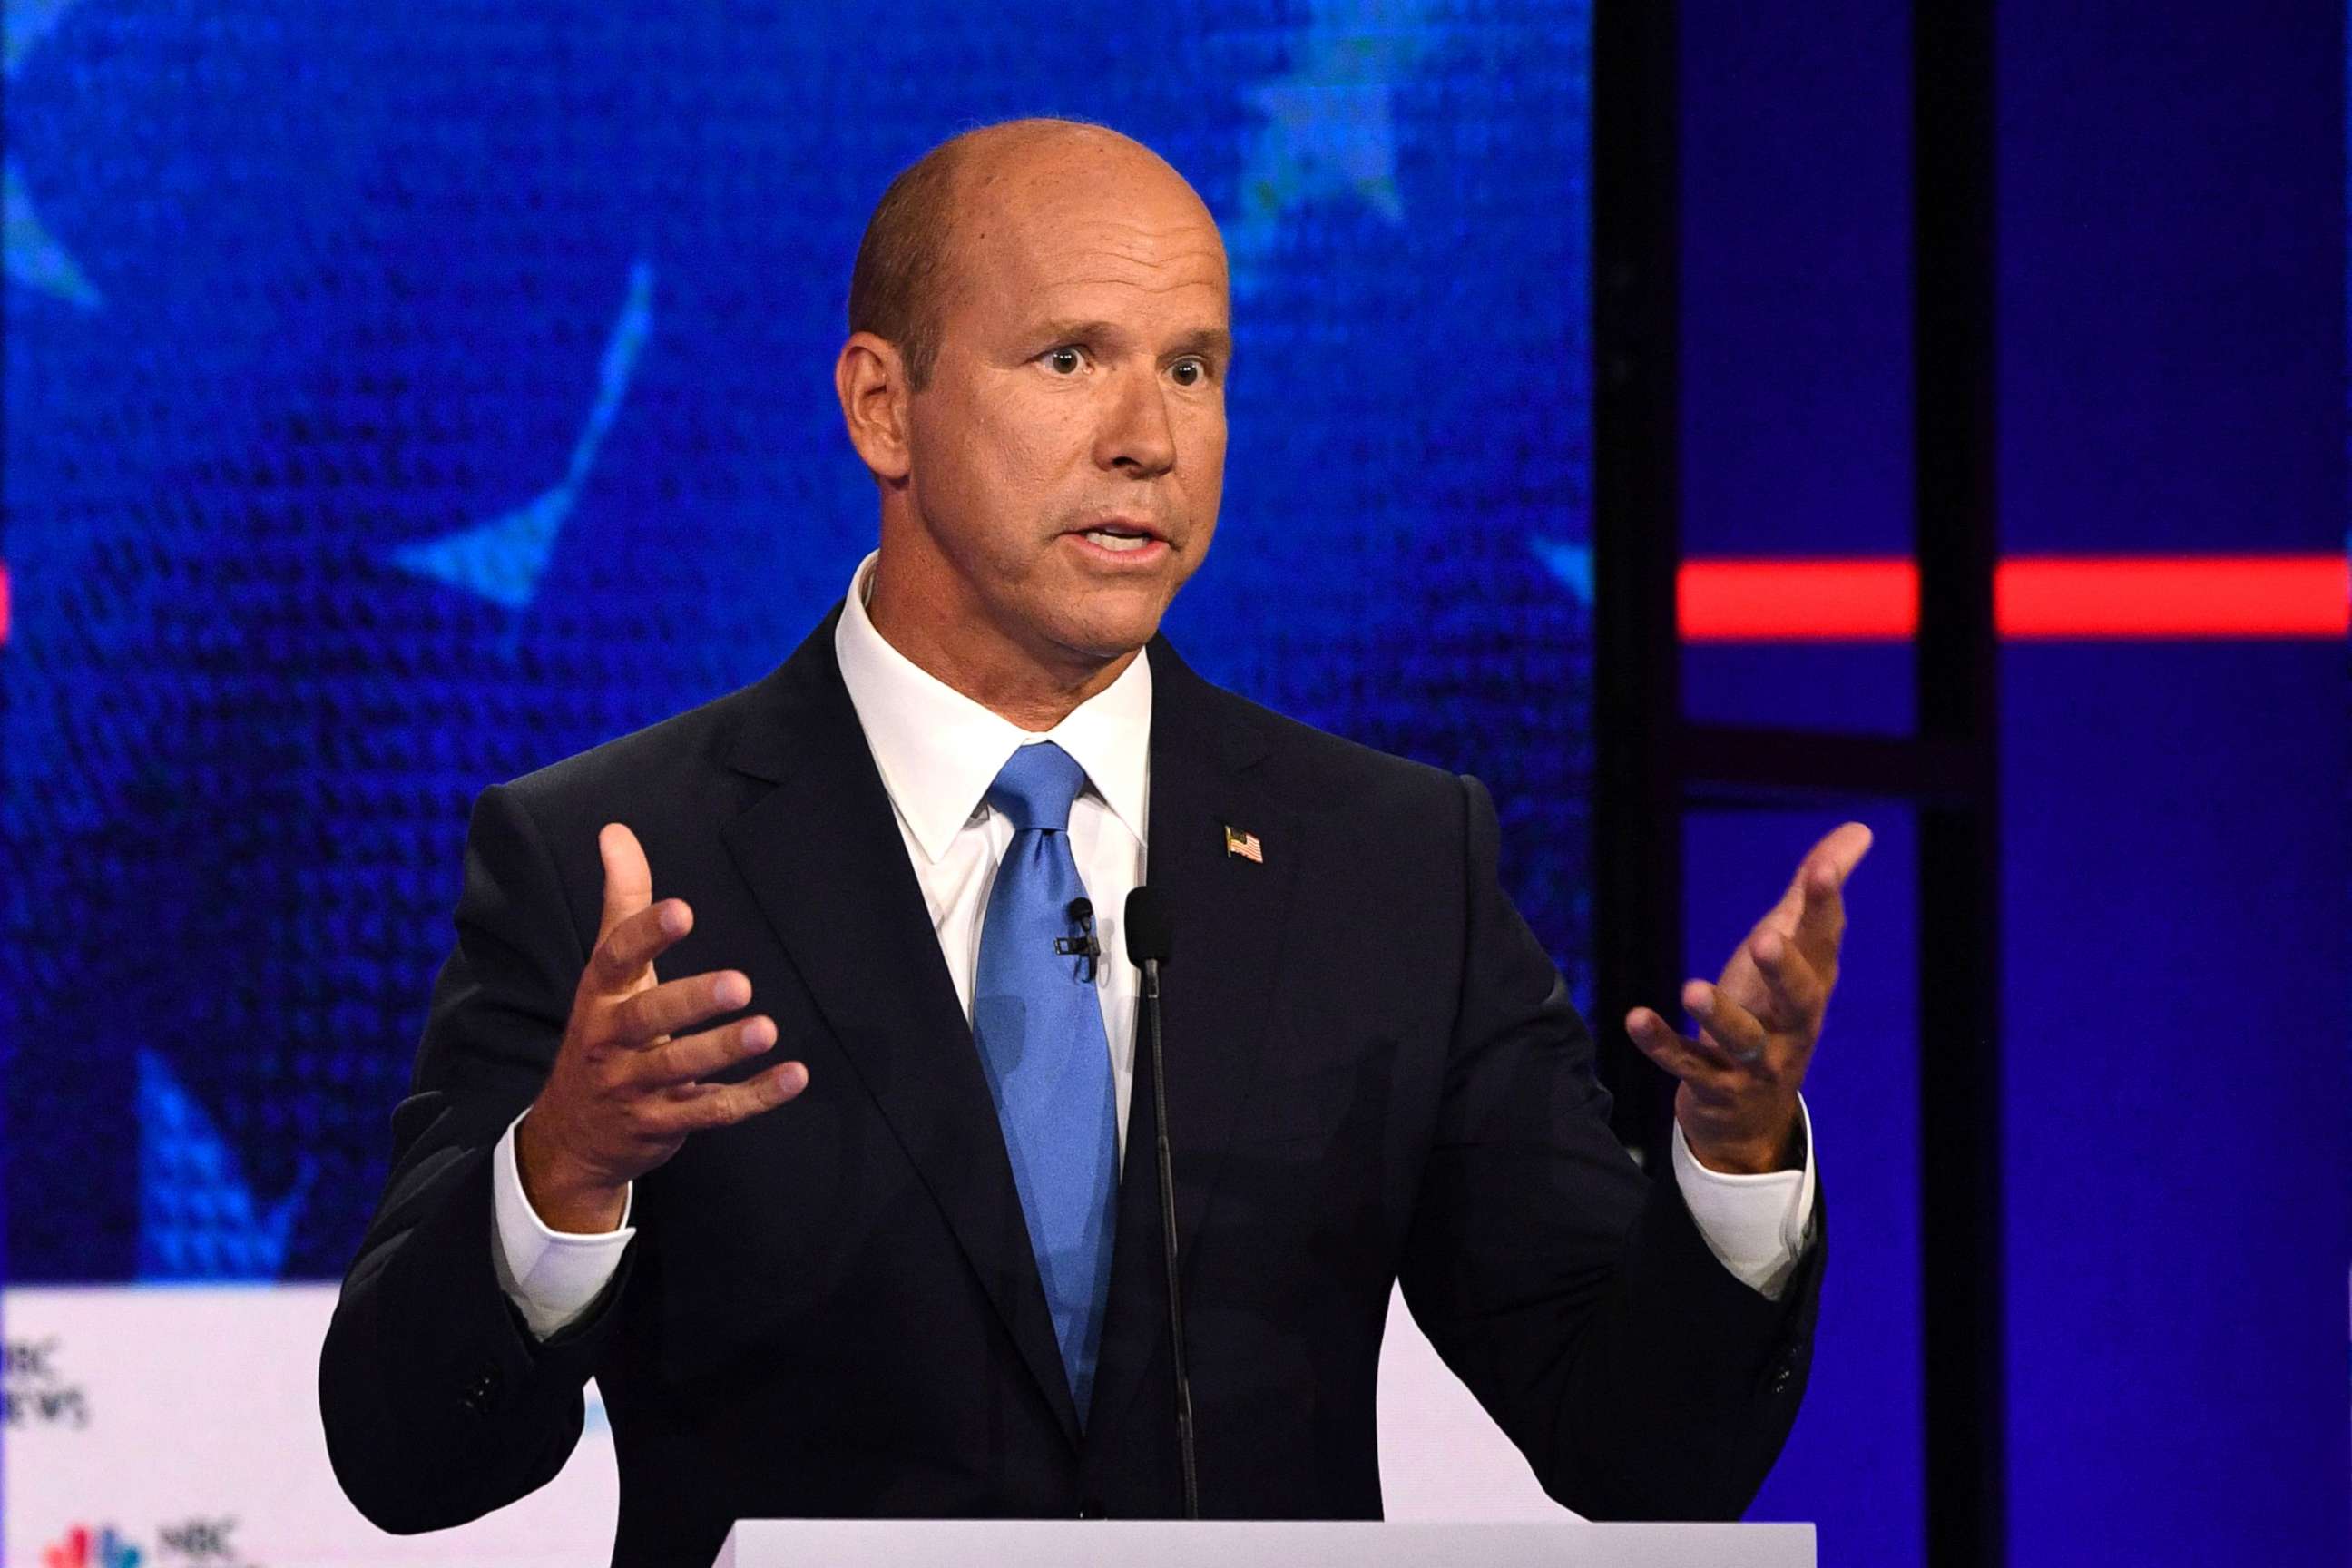 PHOTO: John Delaney participates in the first Democratic primary debate hosted by NBC News at the Adrienne Arsht Center for the Performing Arts in Miami, Florida, June 26, 2019.